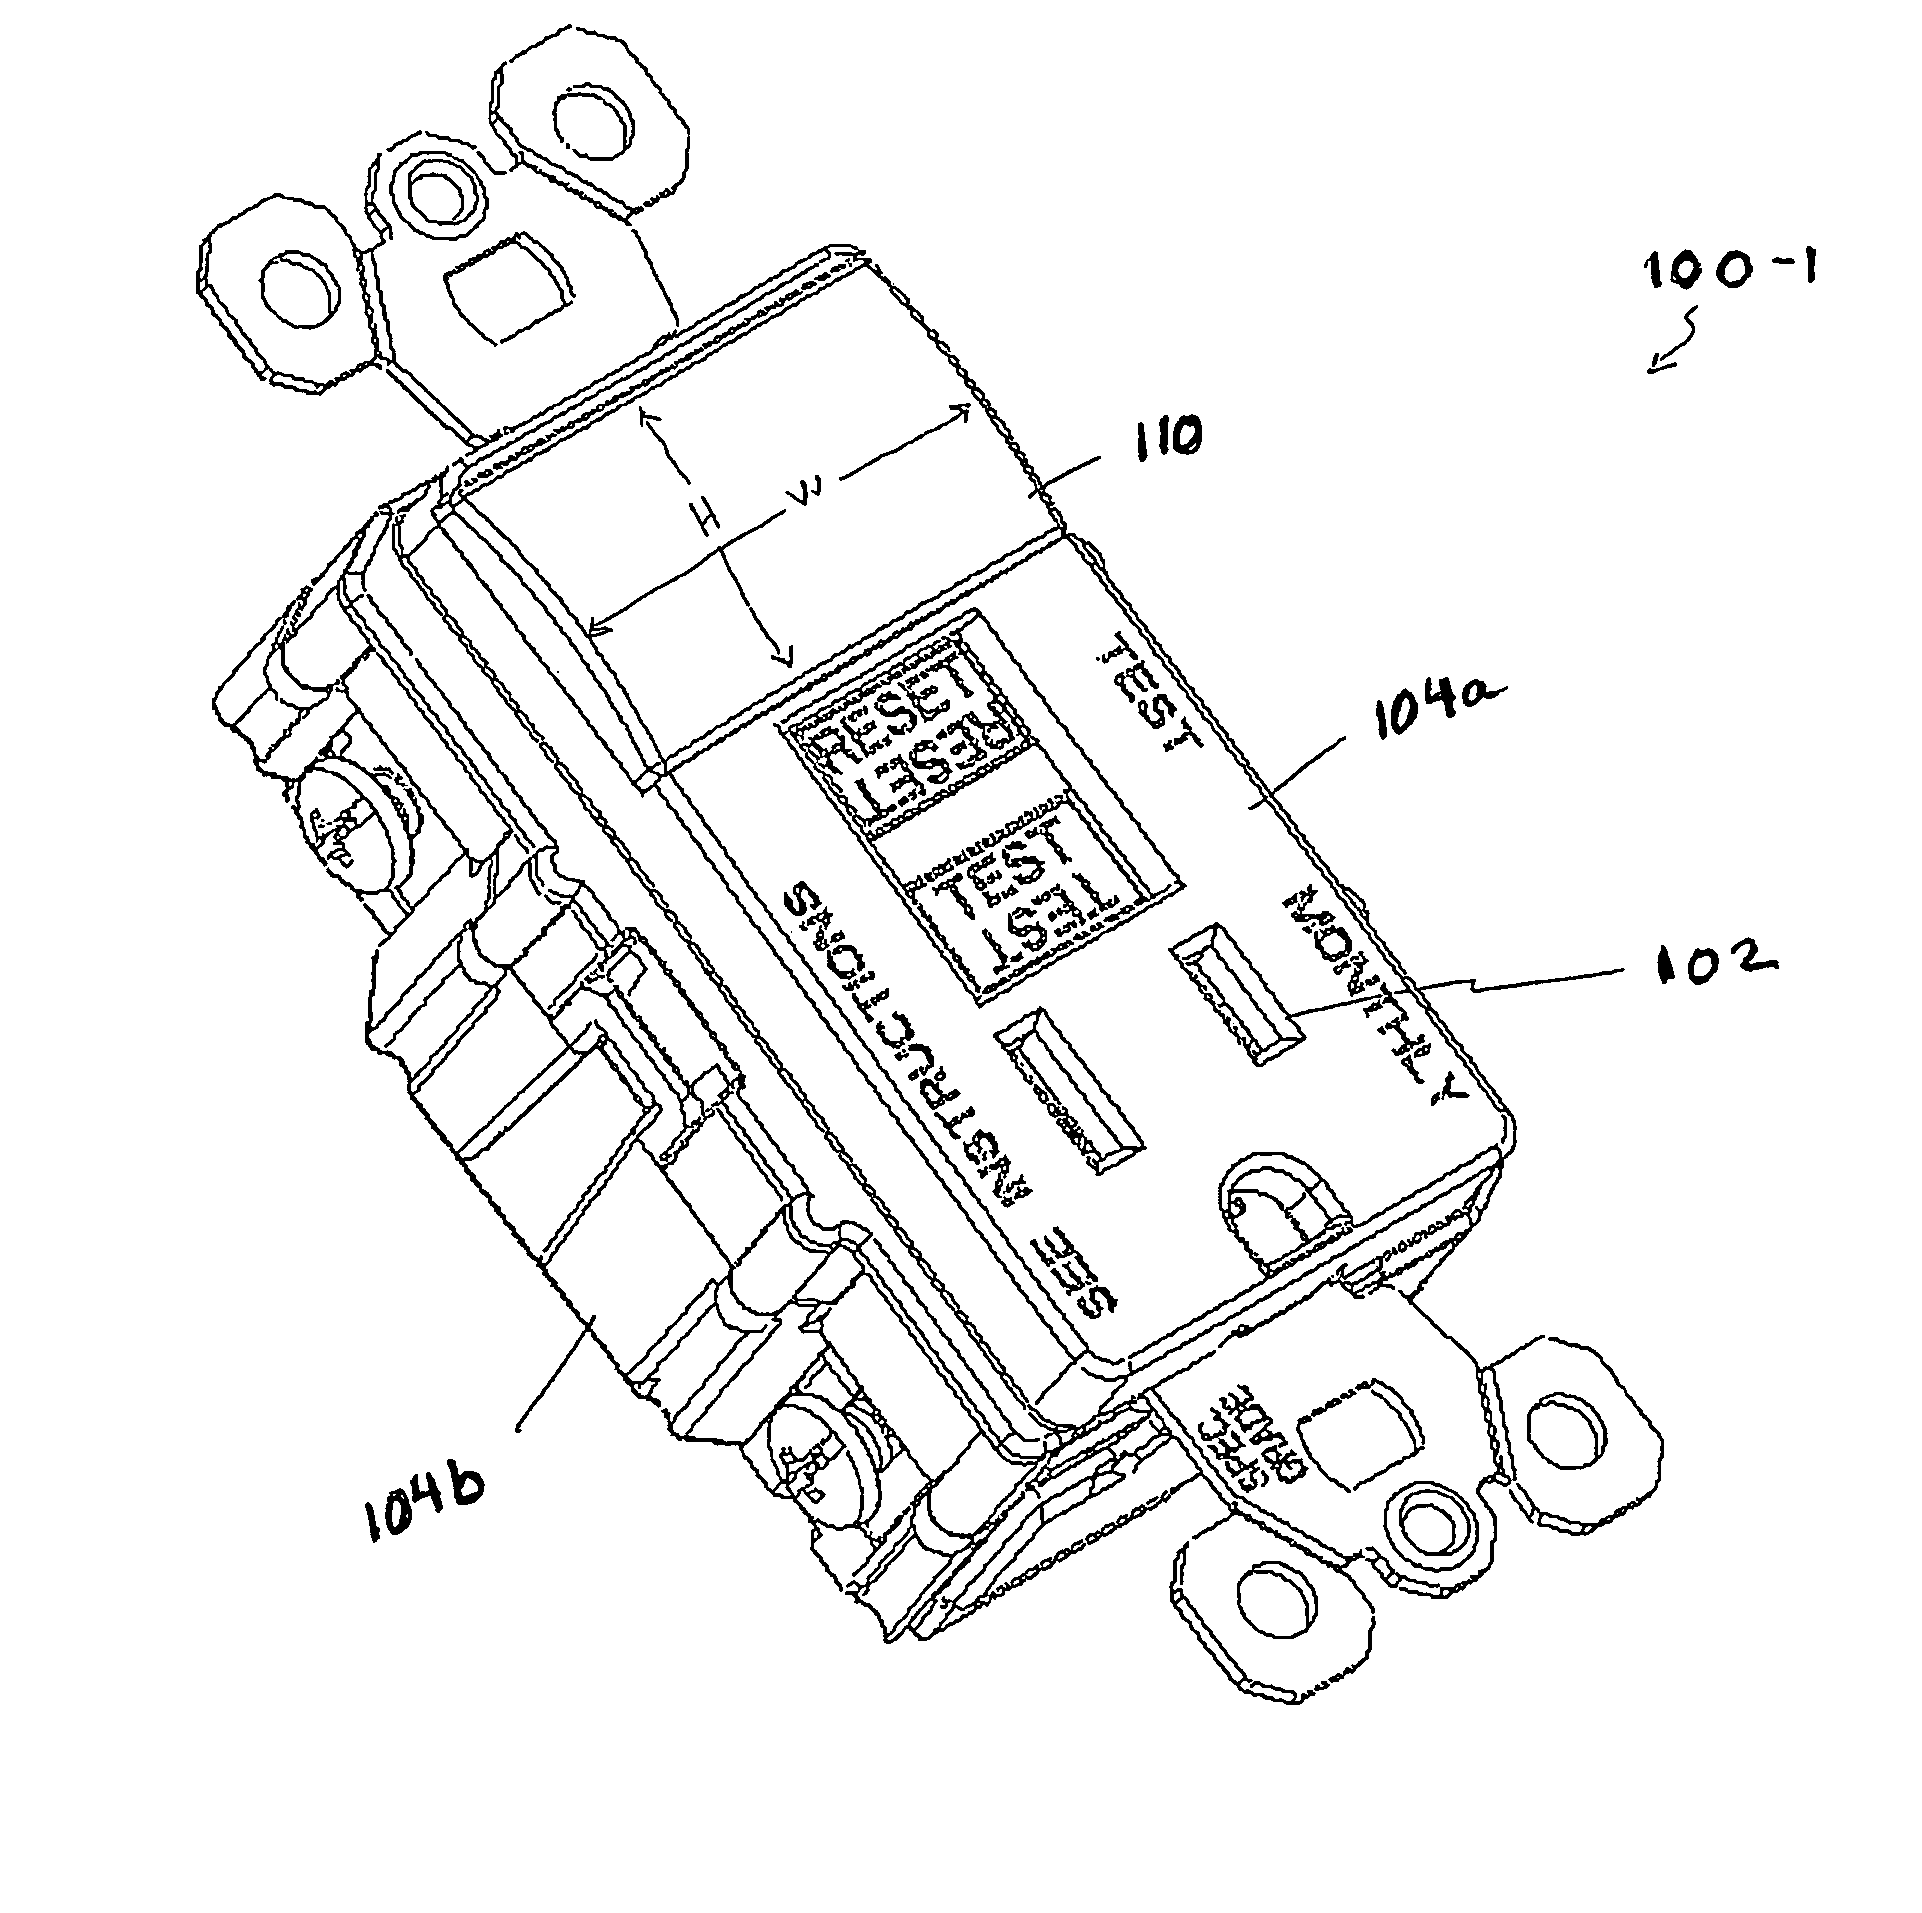 Electrical device with circuit protection component and light